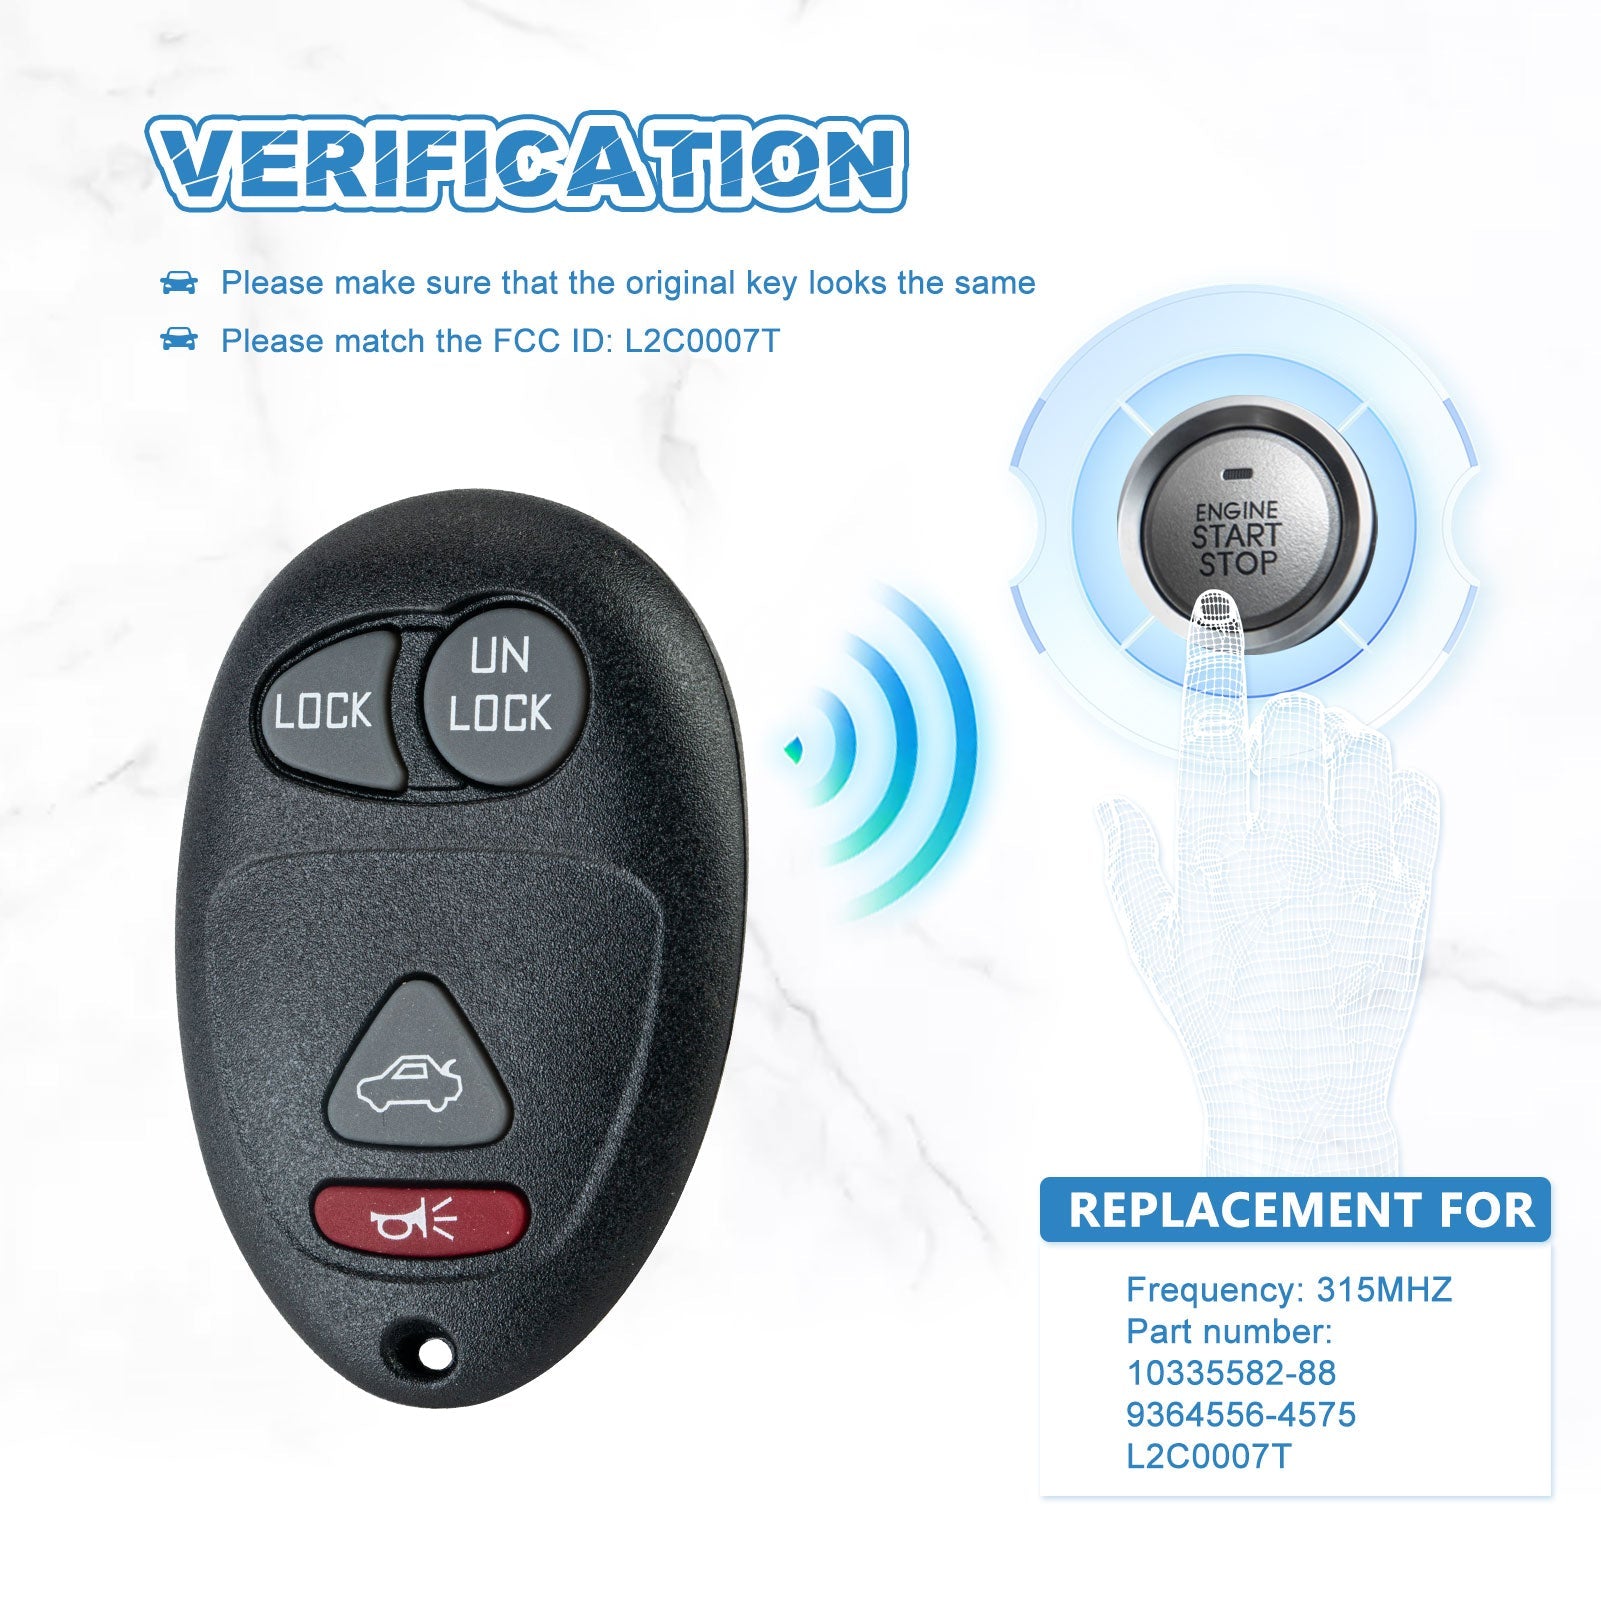 Keyless Entry Car Key Fob 315MHZ Replacement for 2001-2004 Buiick Regal, 2002-2007 Buiick Rendezvous L2C0007T  KR-U4RA -05